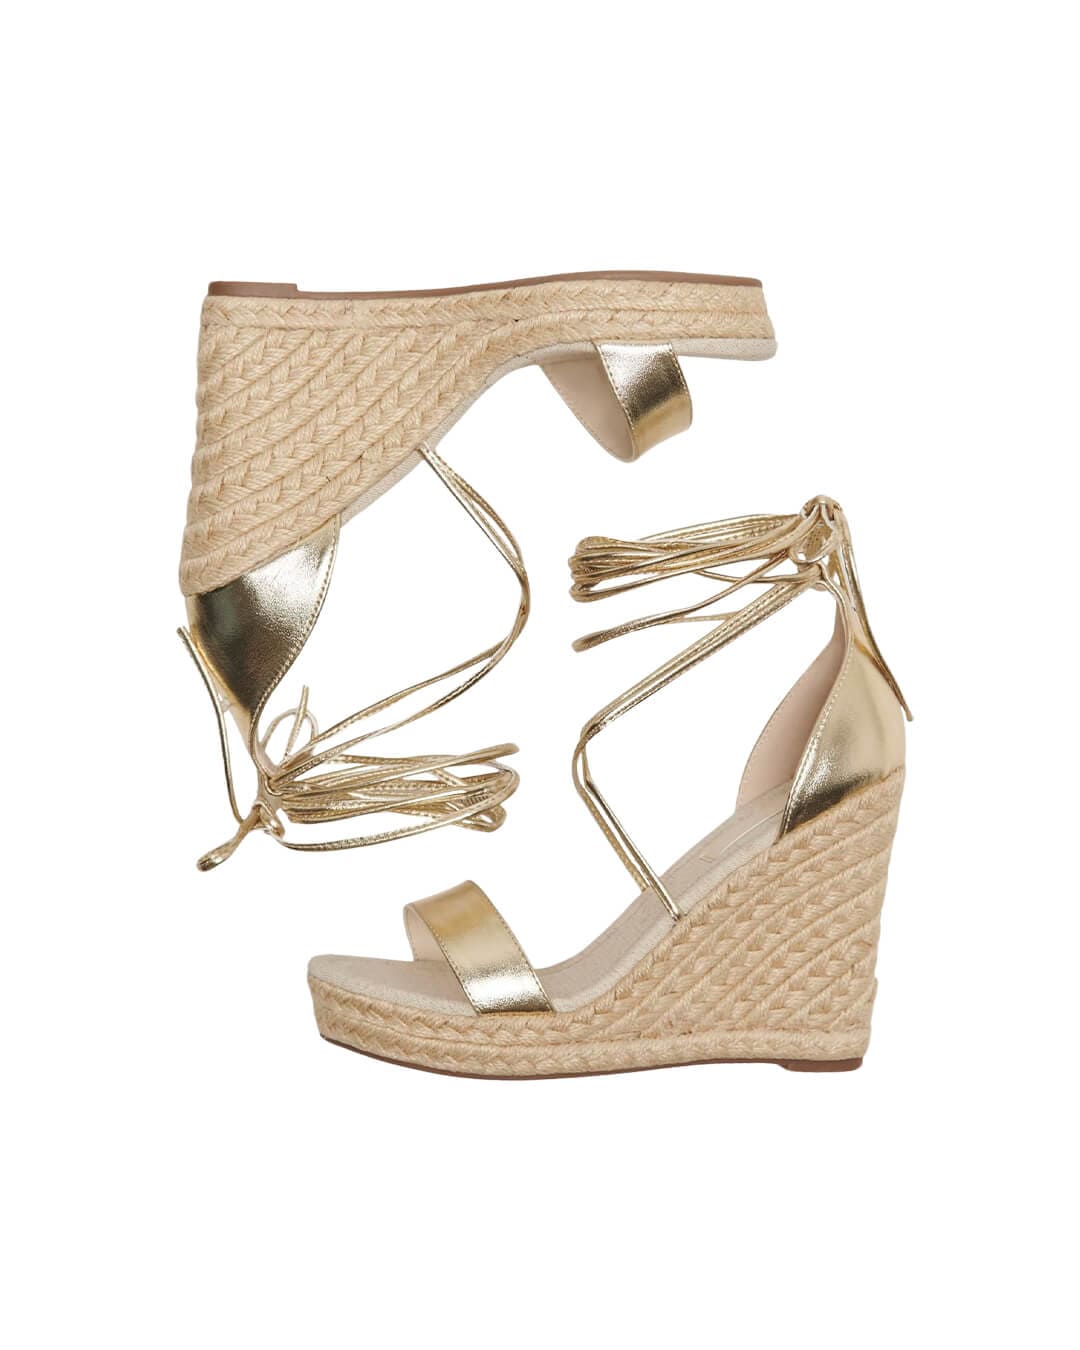 Only Shoes Only Gold Amelia Foil Wrap Wedges